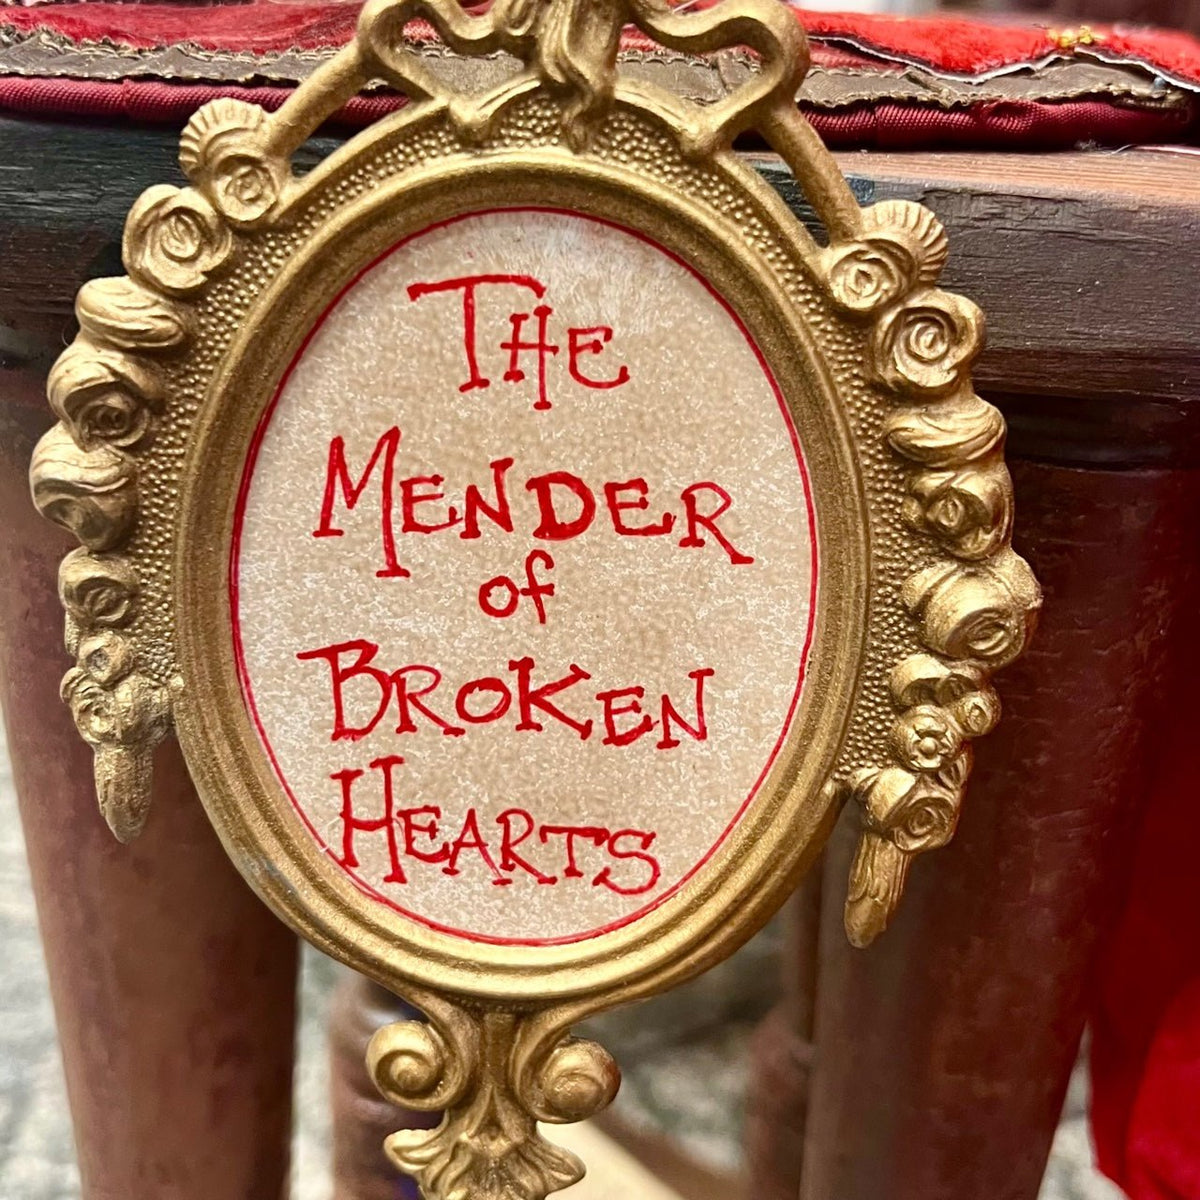 The Mender of Broken Hearts by The Toymaker - Holiday Warehouse